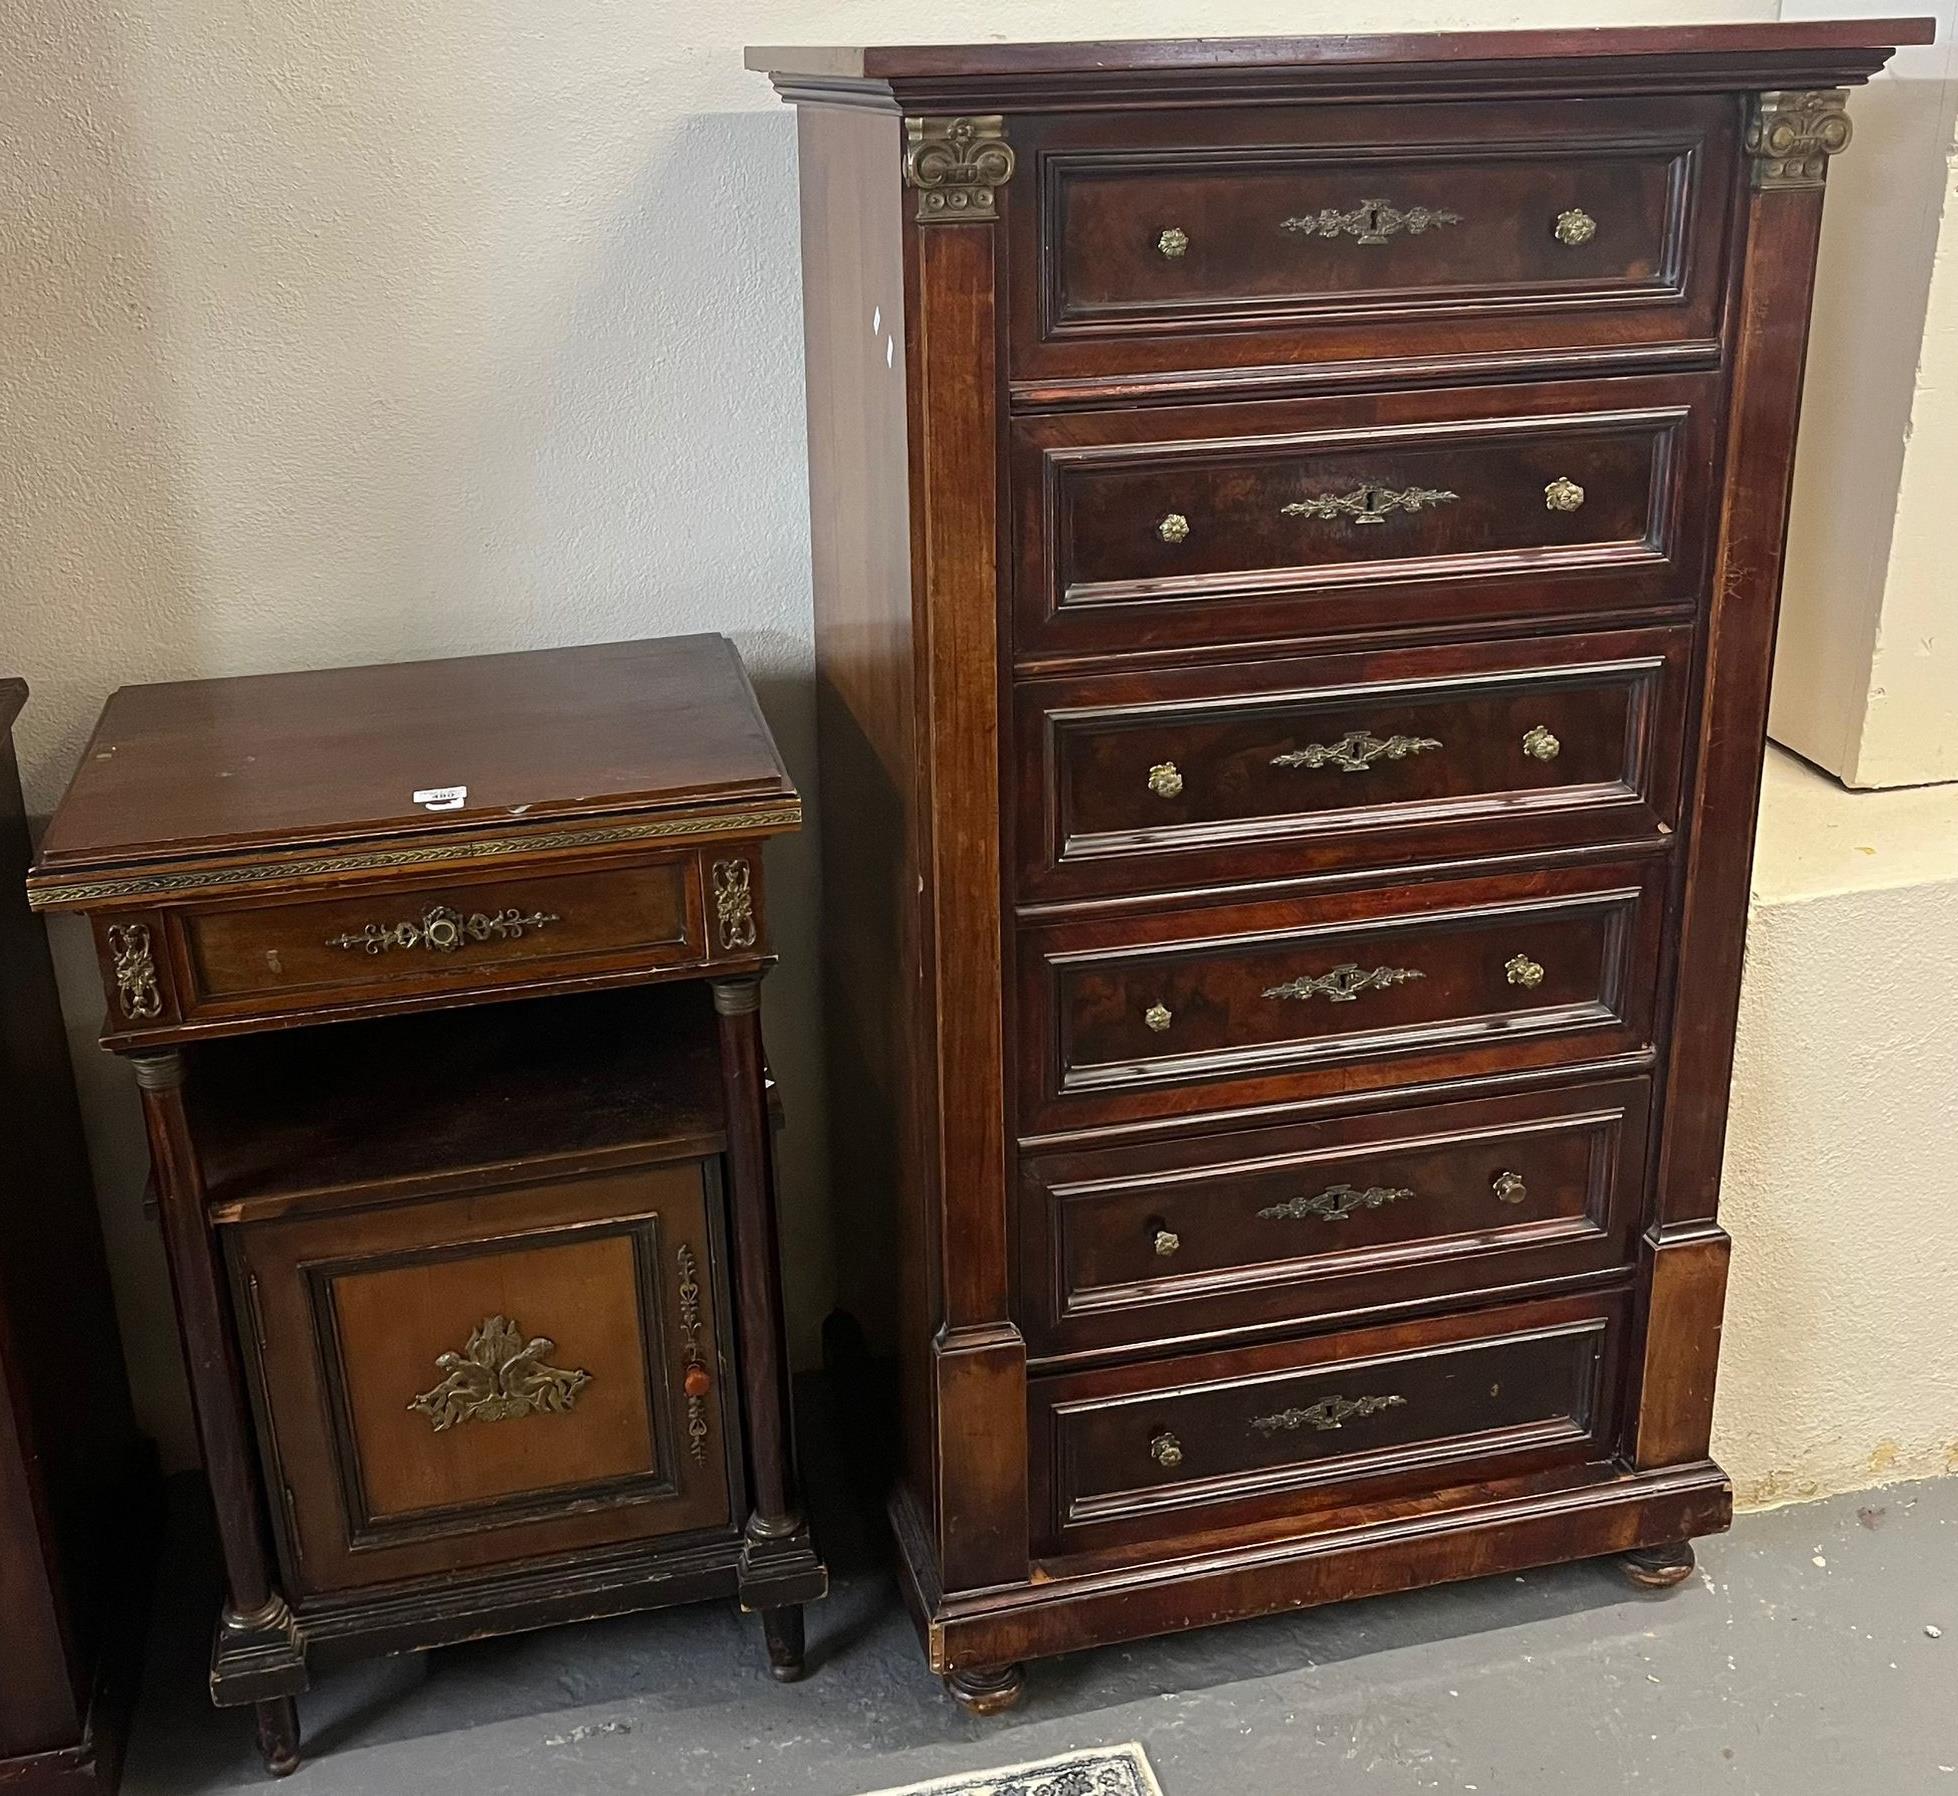 Good quality early 20th century French design tall chest of six mahogany moulded drawers with gilt